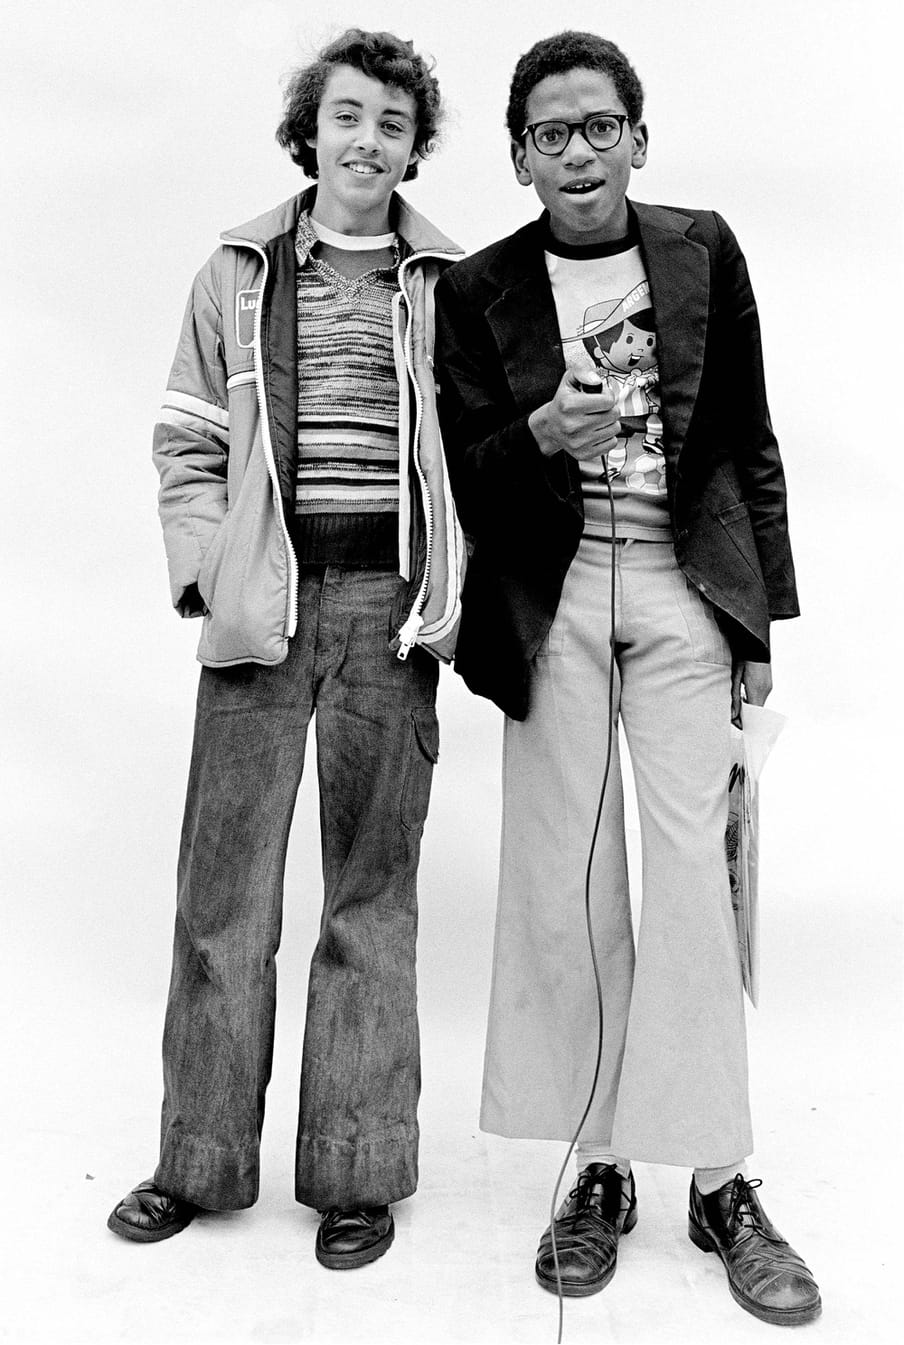 Two young figures in black and white photo; to the left, in a stripy jumper, longer hair and jacket smiling at camera; the other in glasses, a cartoon shirt and black blazer, short hair, holding a camera clicker, with a surprised expression